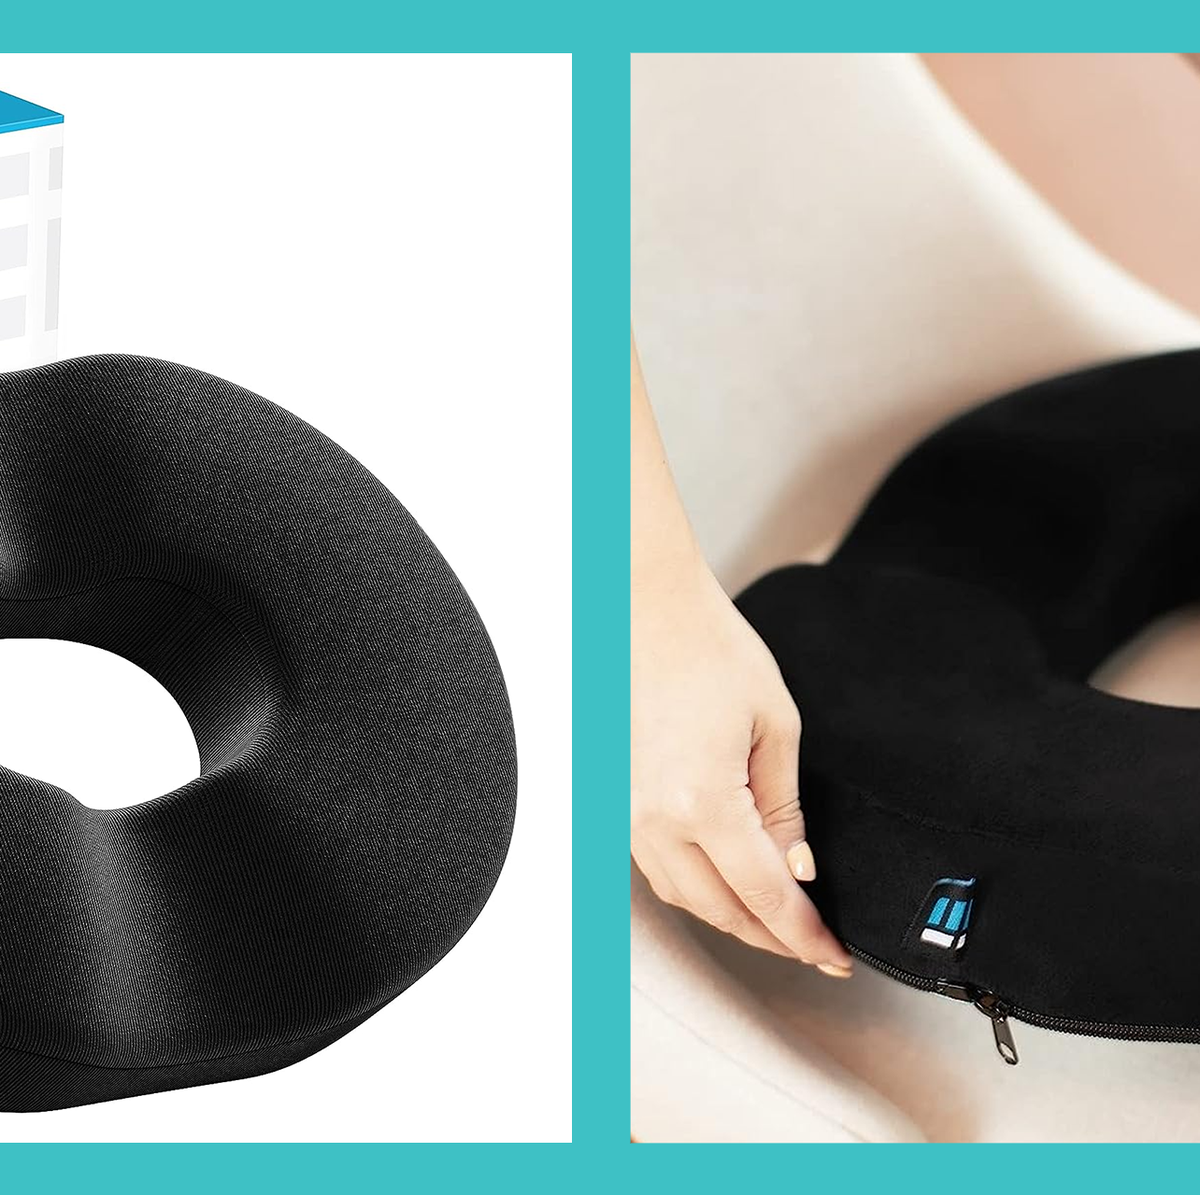 Donut Pillow for Tailbone Pain Medical Donuts for Sitting Pain Relief  (Black)